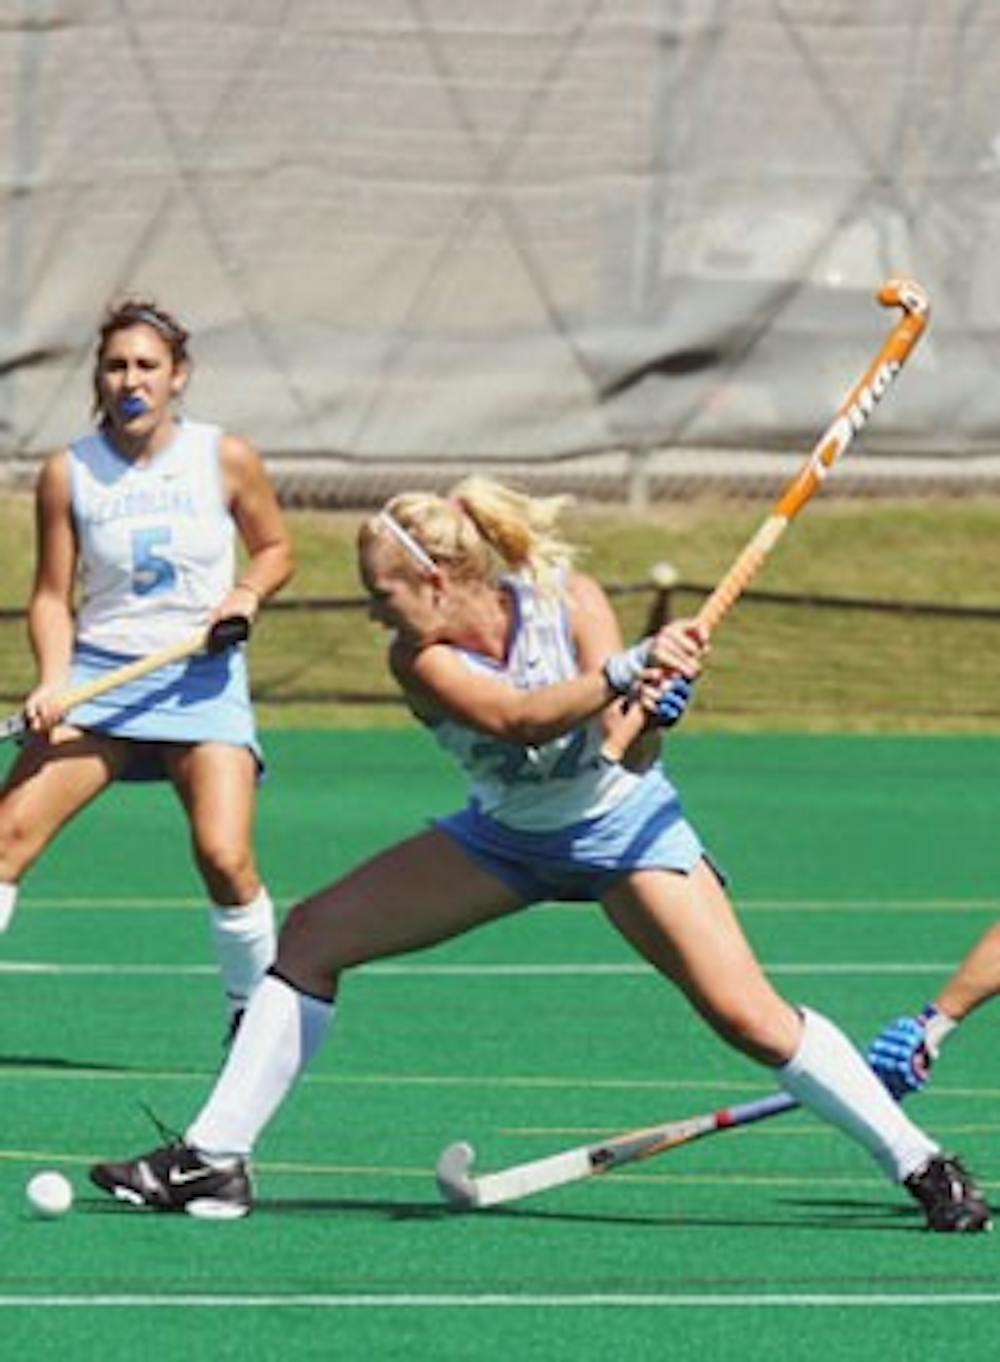 Despite her season-ending injury in 2008, UNC senior Dani Forword still led the team with 25 goals. DTH/Colleen Cook